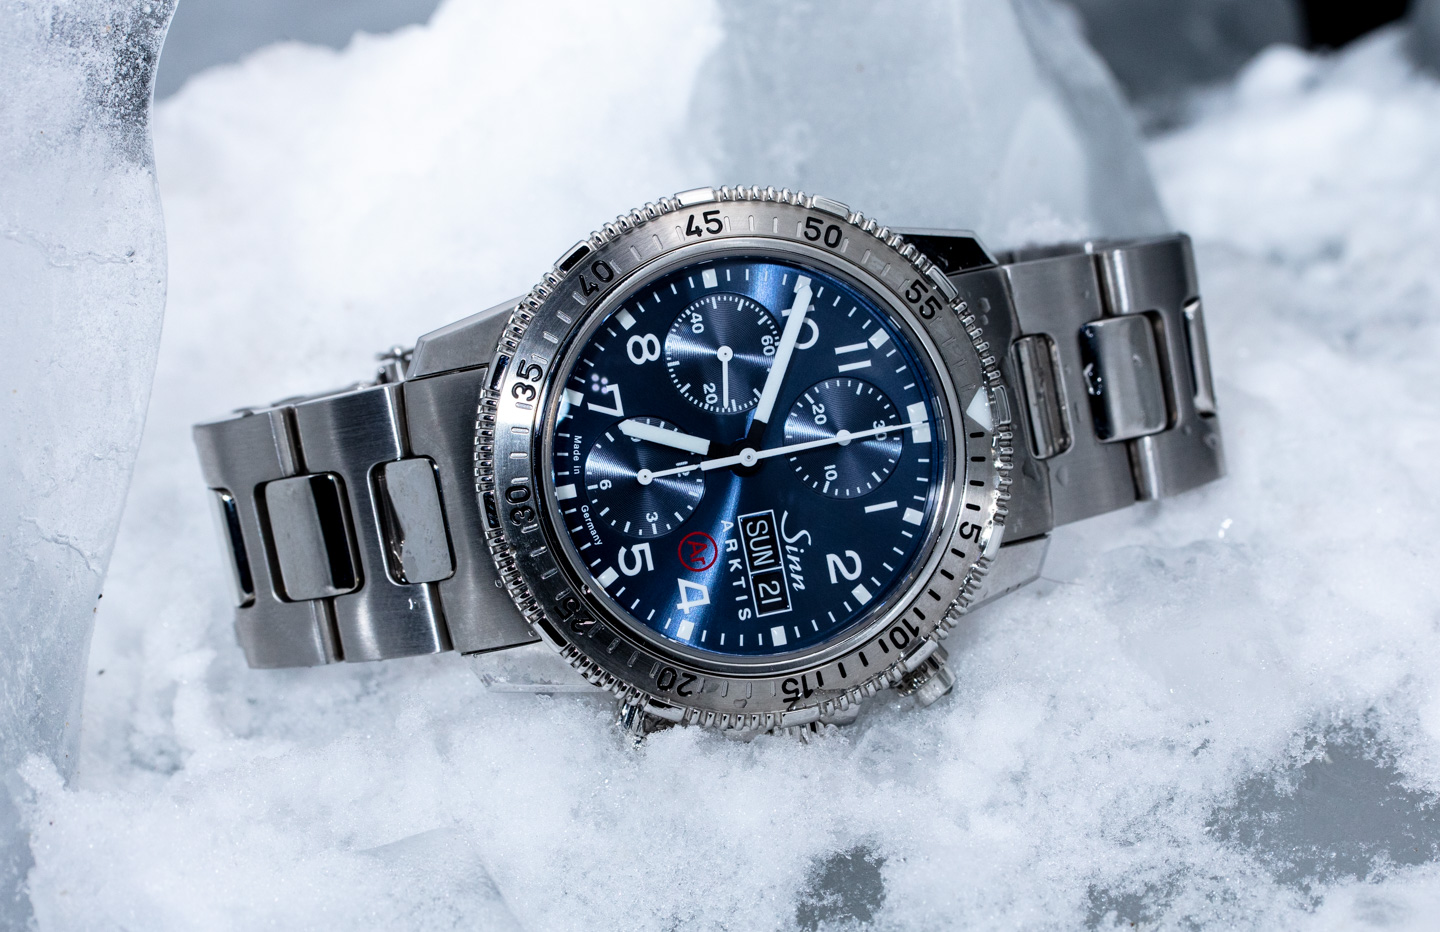 Watch Review: Sinn 206 Arktis II, A Cold-Weather Diver That Will Warm Your Heart